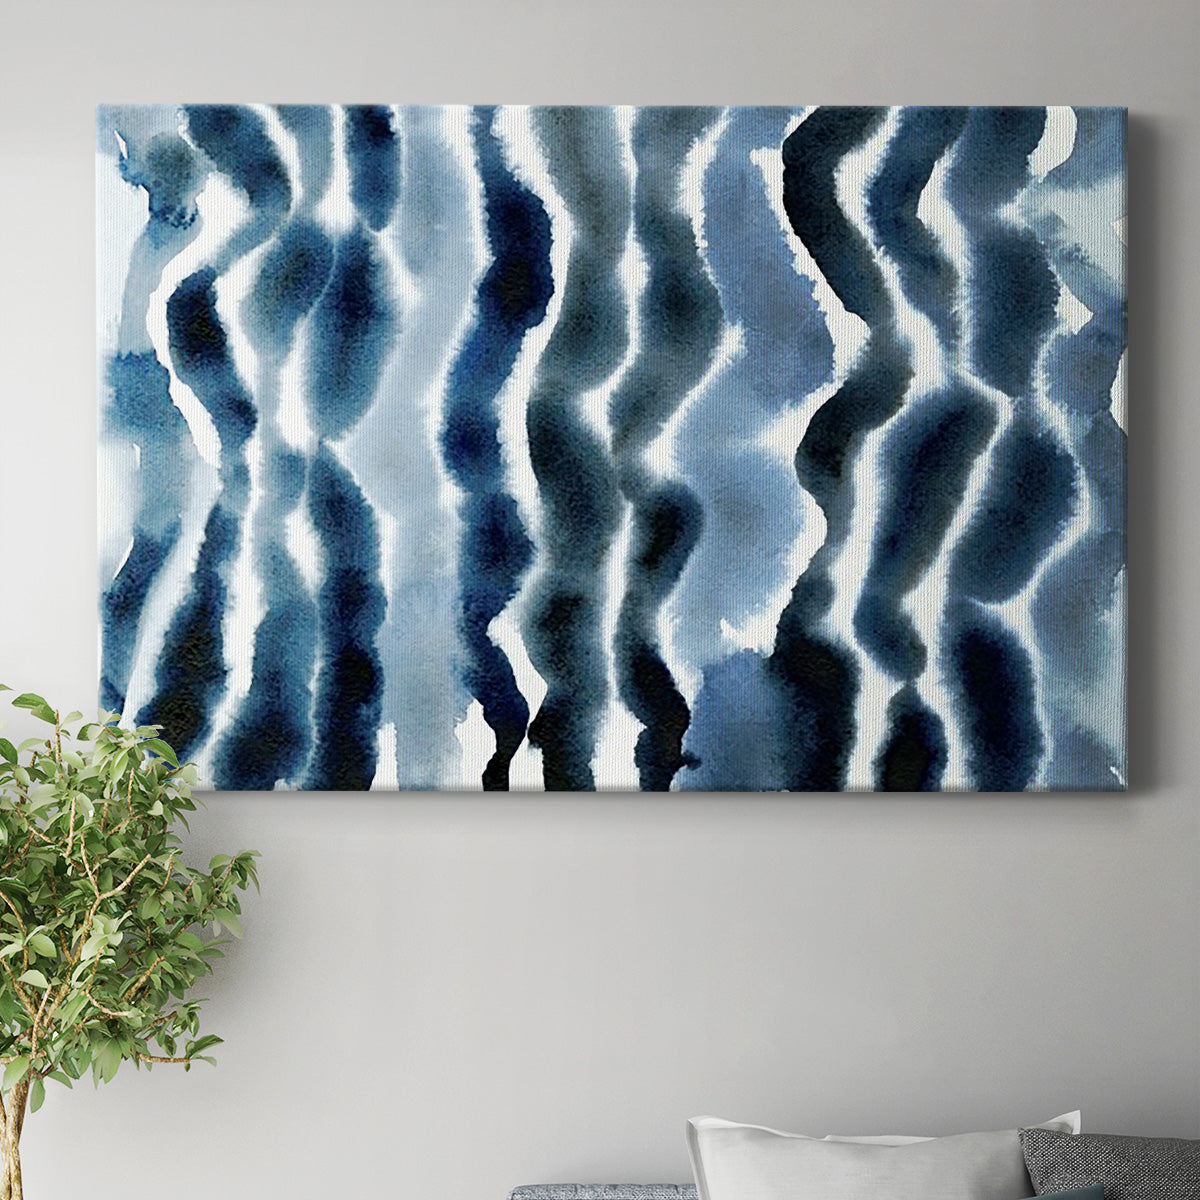 True Blue Wave I Premium Gallery Wrapped Canvas - Ready to Hang